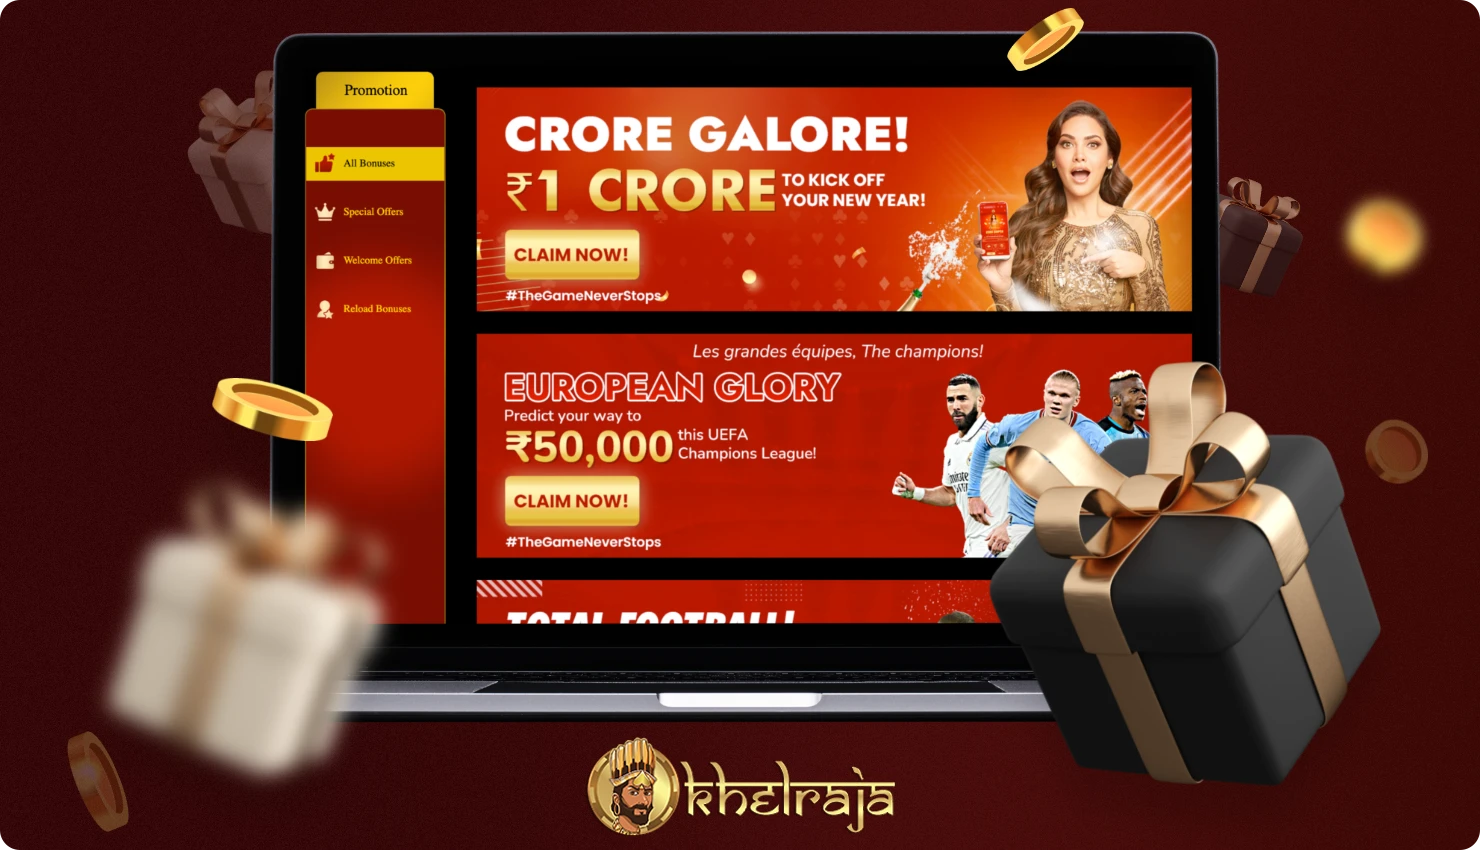 Khelraja betting company offers its Indian customers various bonuses and promotions